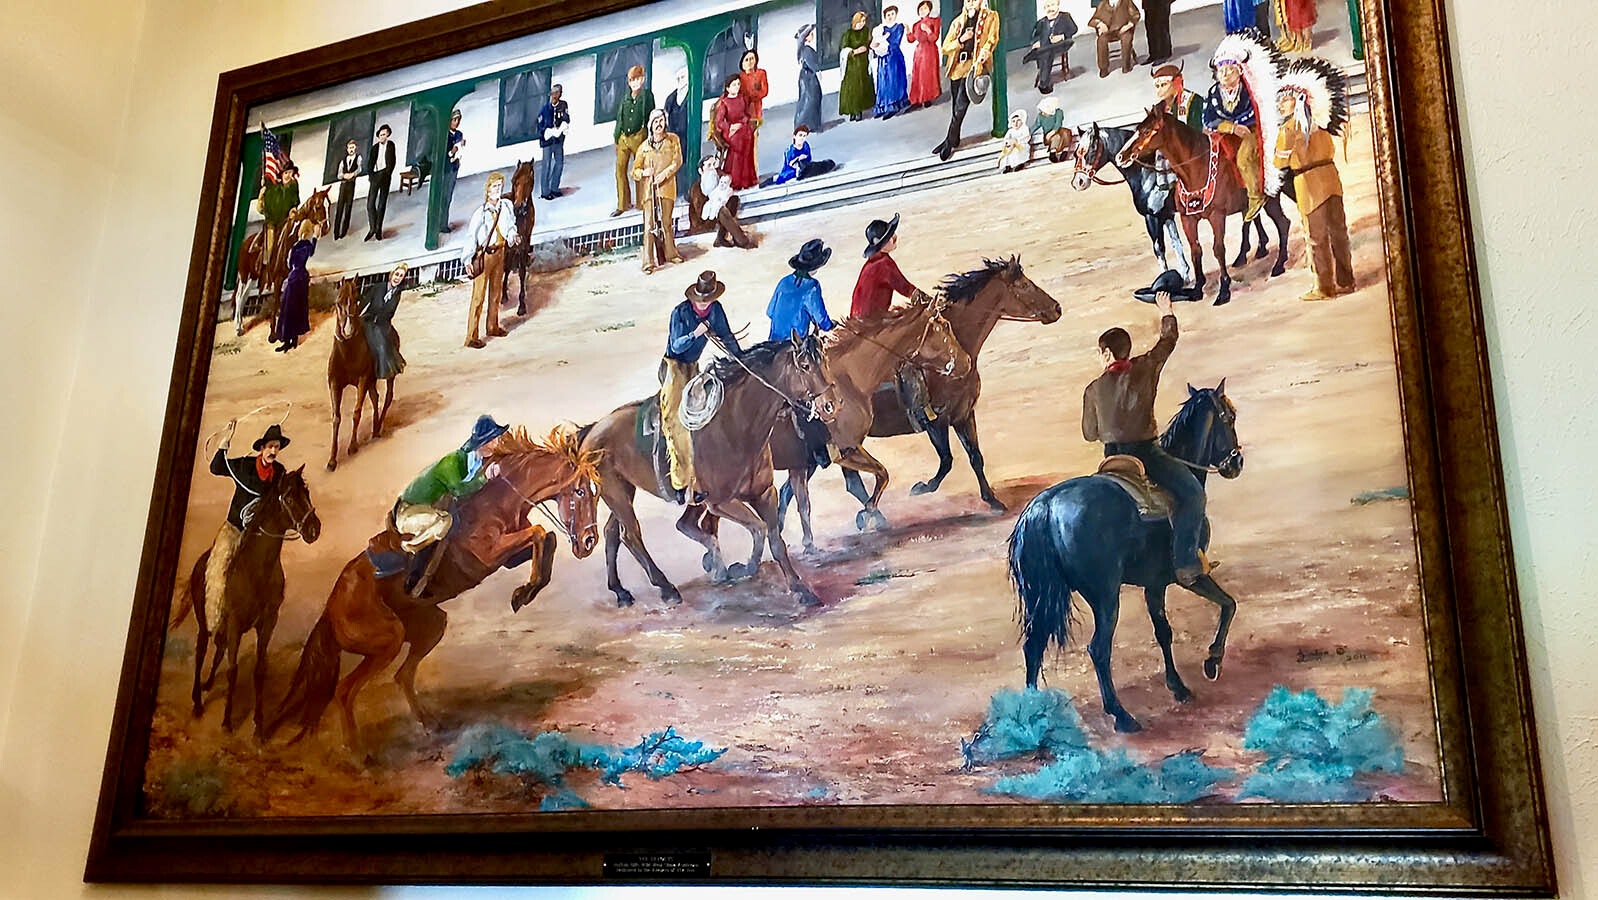 A painting depicts the scene at the Sheridan Inn when Buffalo Bill Cody managed it.